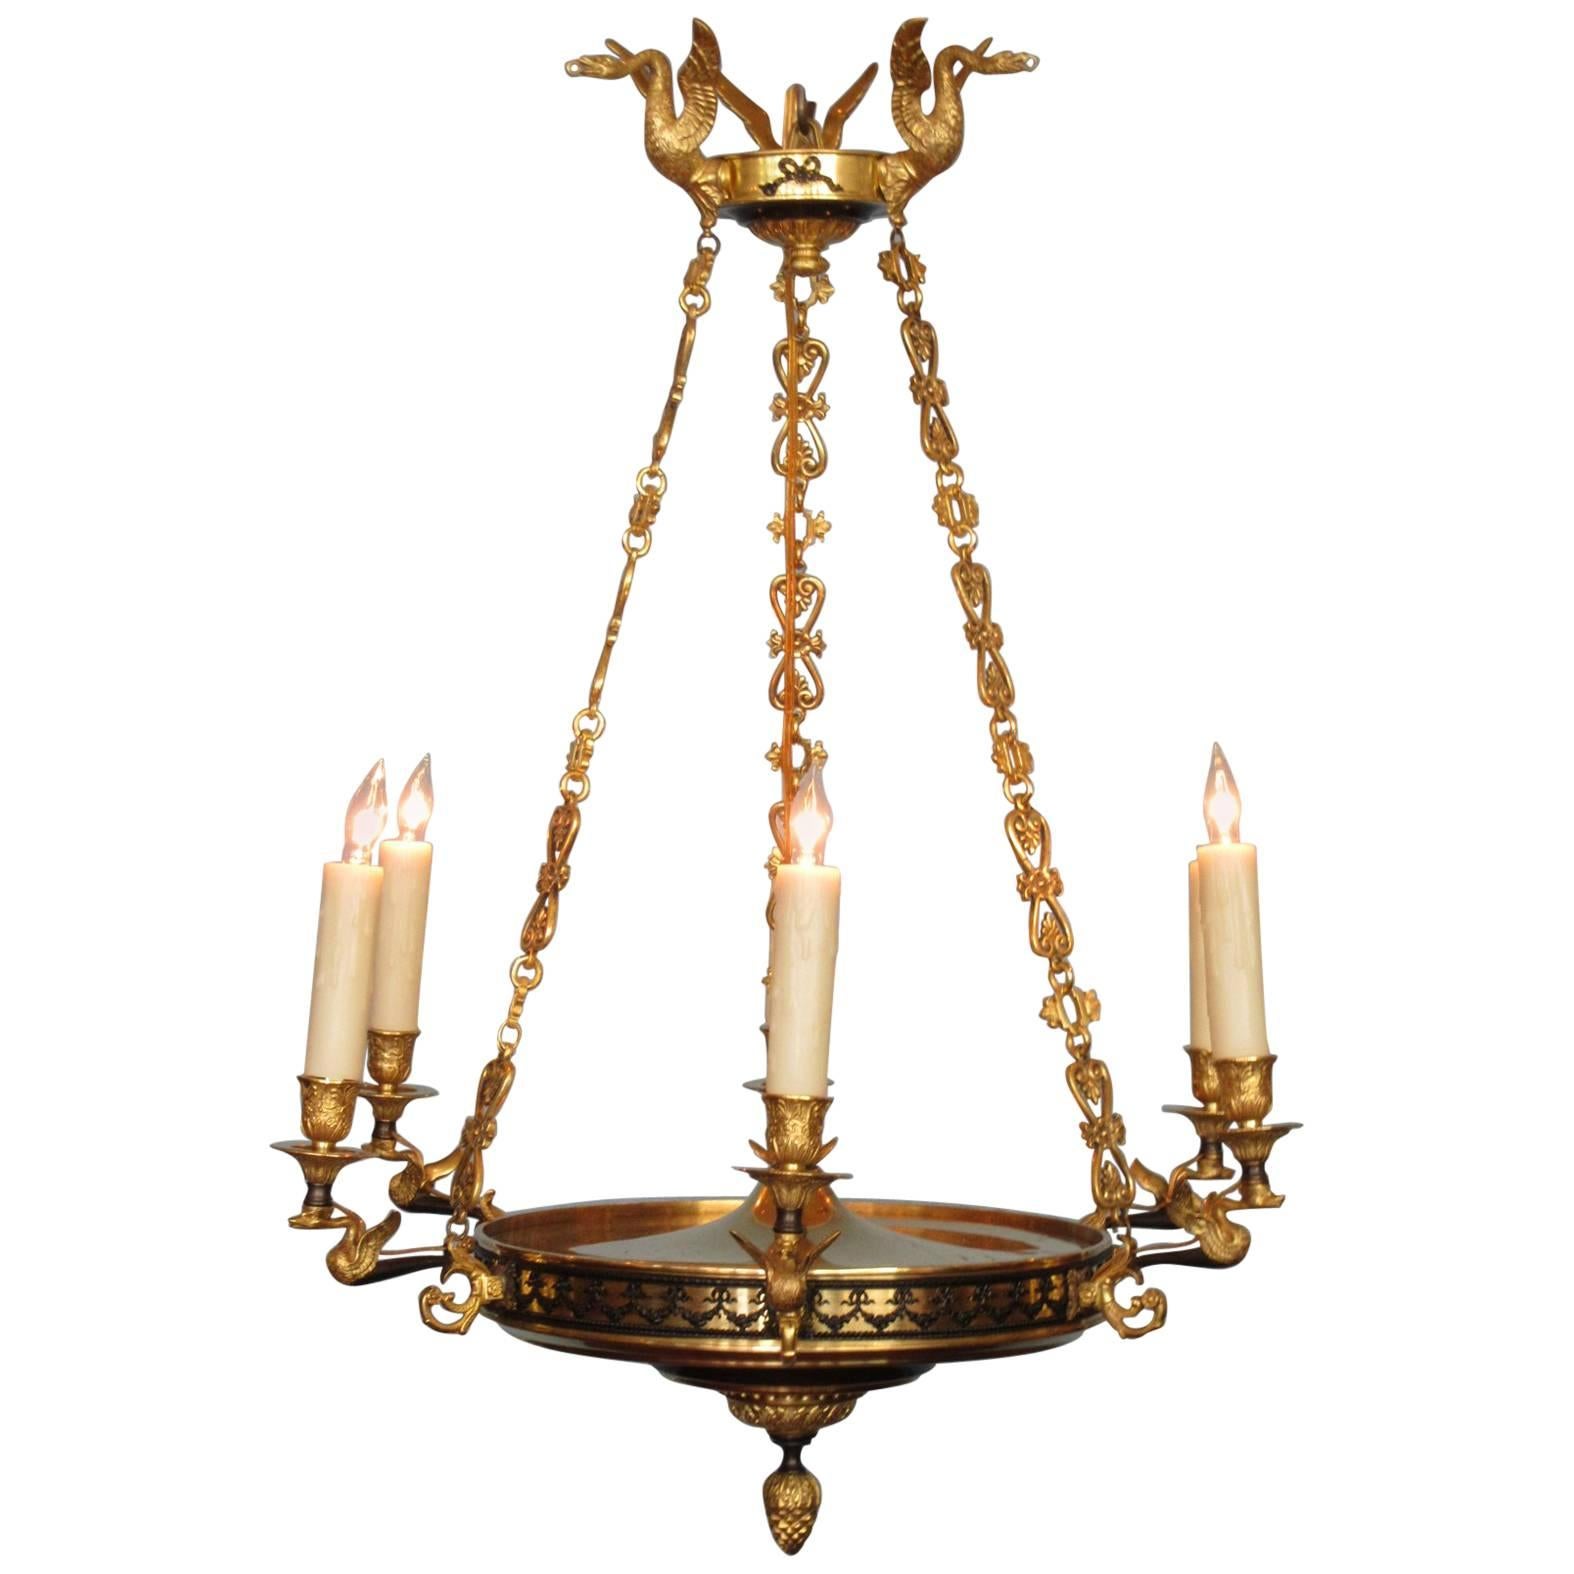 Early 19th Century French Restoration Patinated and Bronze Dore Swan Chandelier